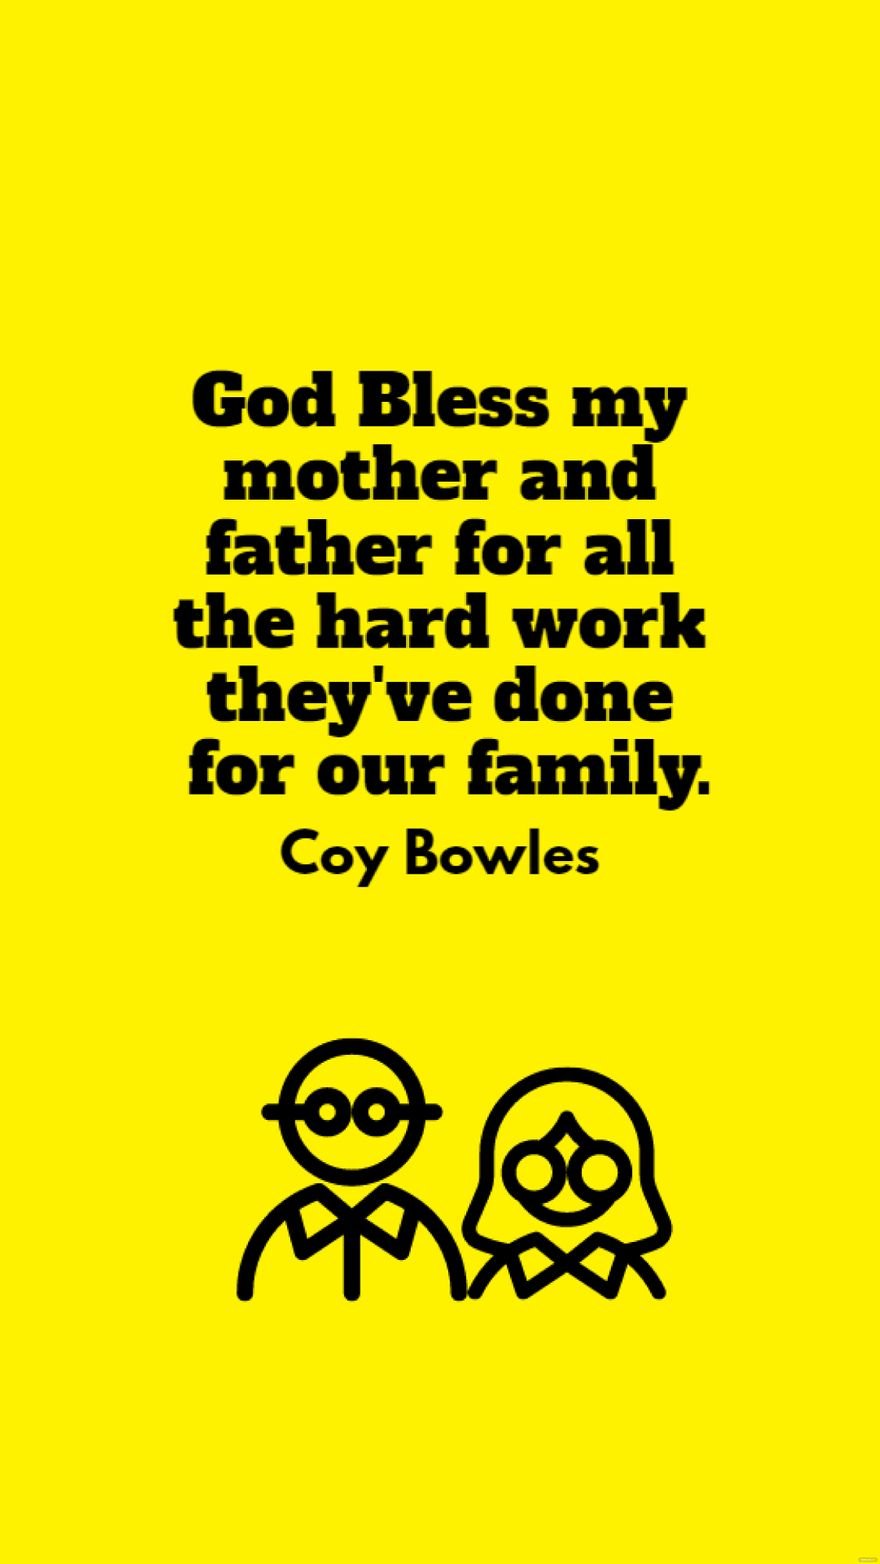 Coy Bowles - God Bless my mother and father for all the hard work they've done for our family.